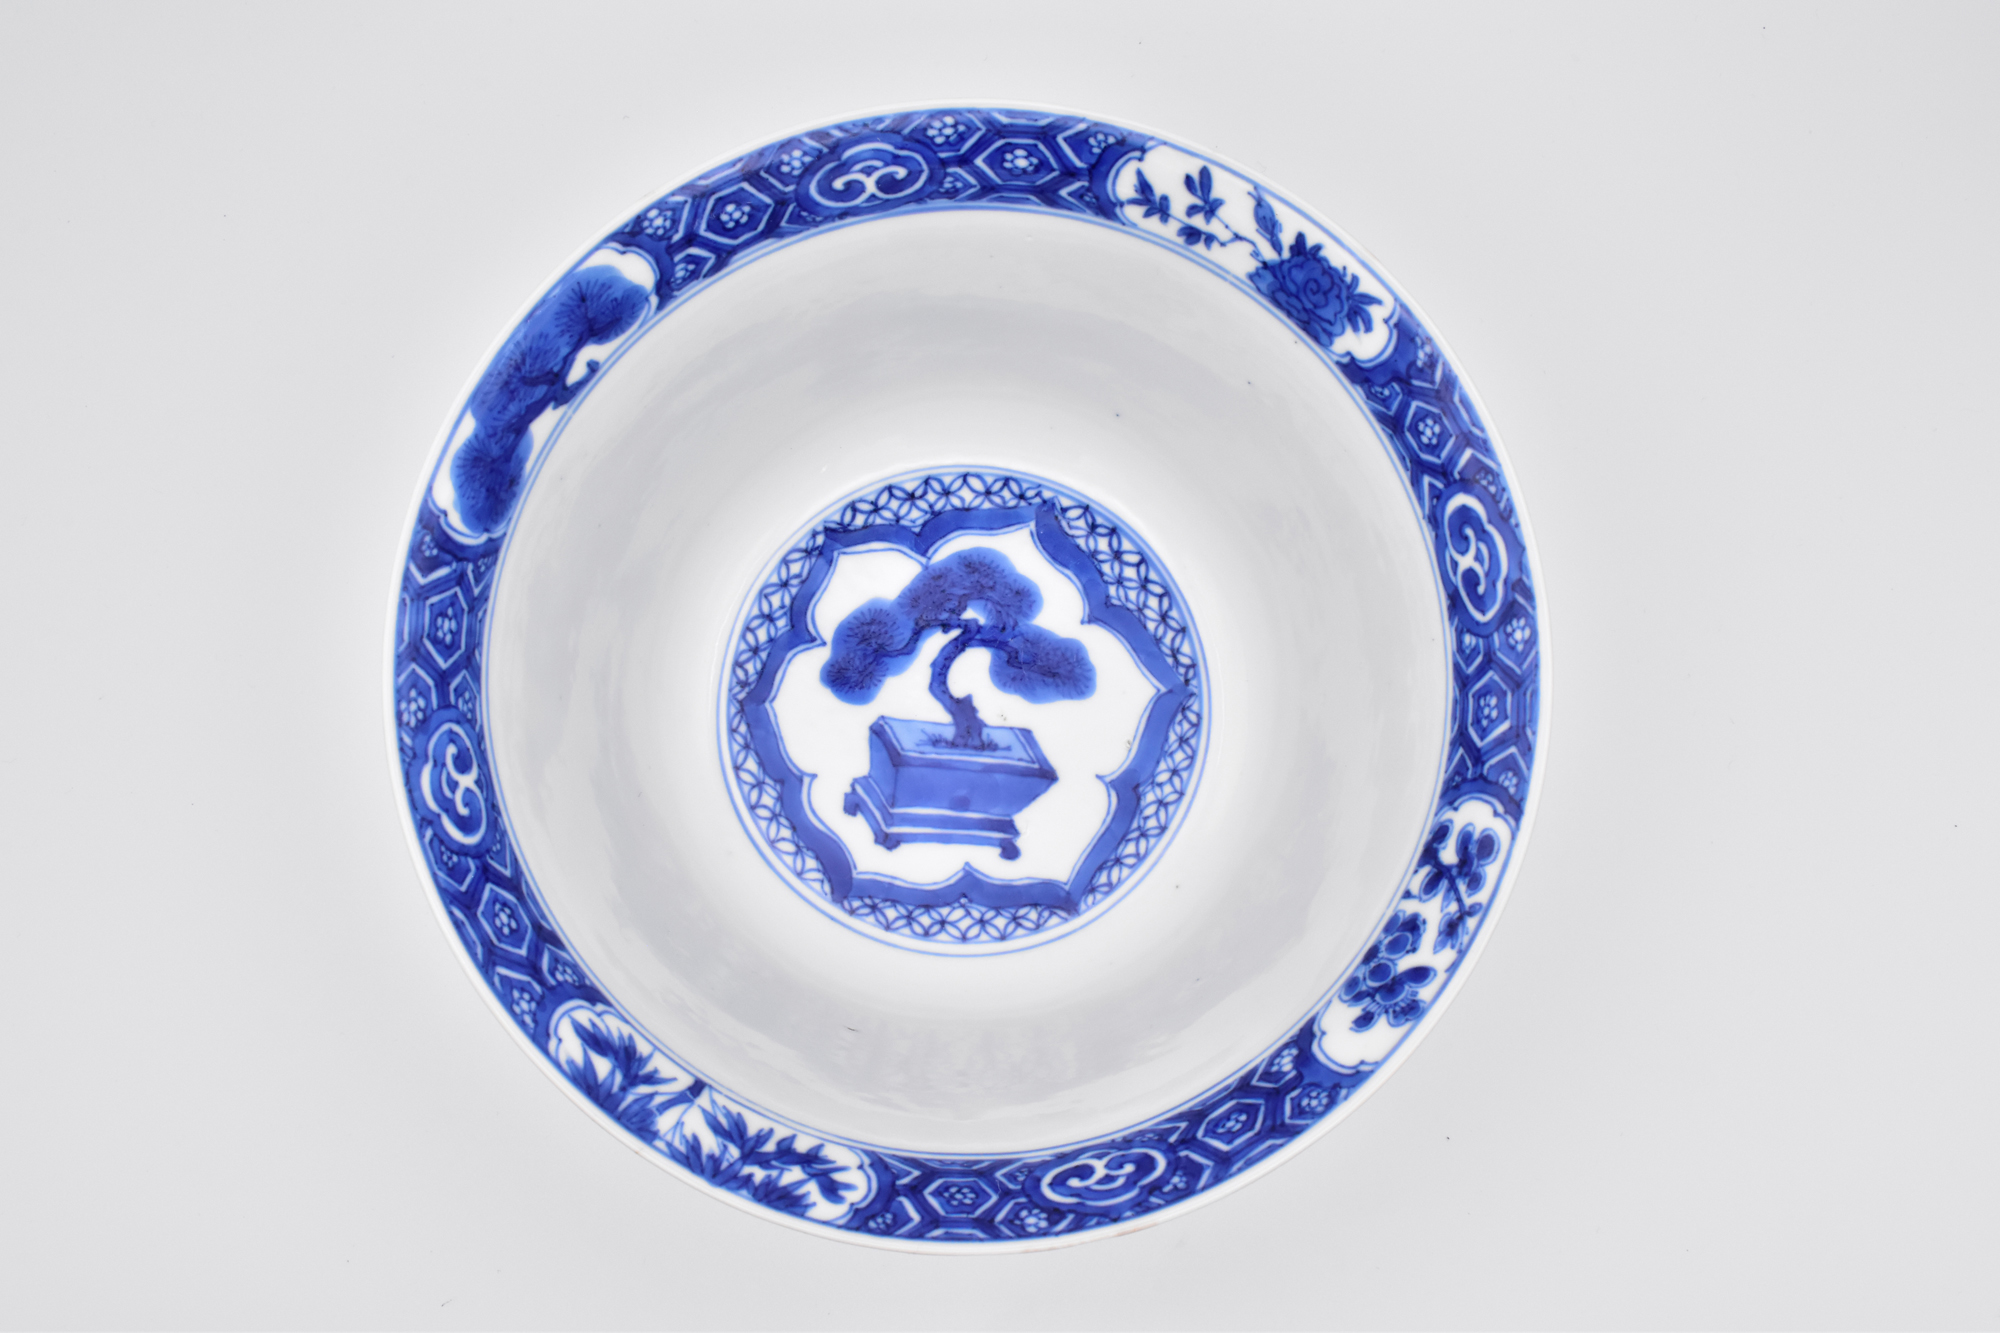 A GOOD CHINESE BLUE AND WHITE PORCELAIN ‘EIGHTEEN SCHOLARS’ BOWL, KANGXI PERIOD, 1662 – 1722 - Image 7 of 22